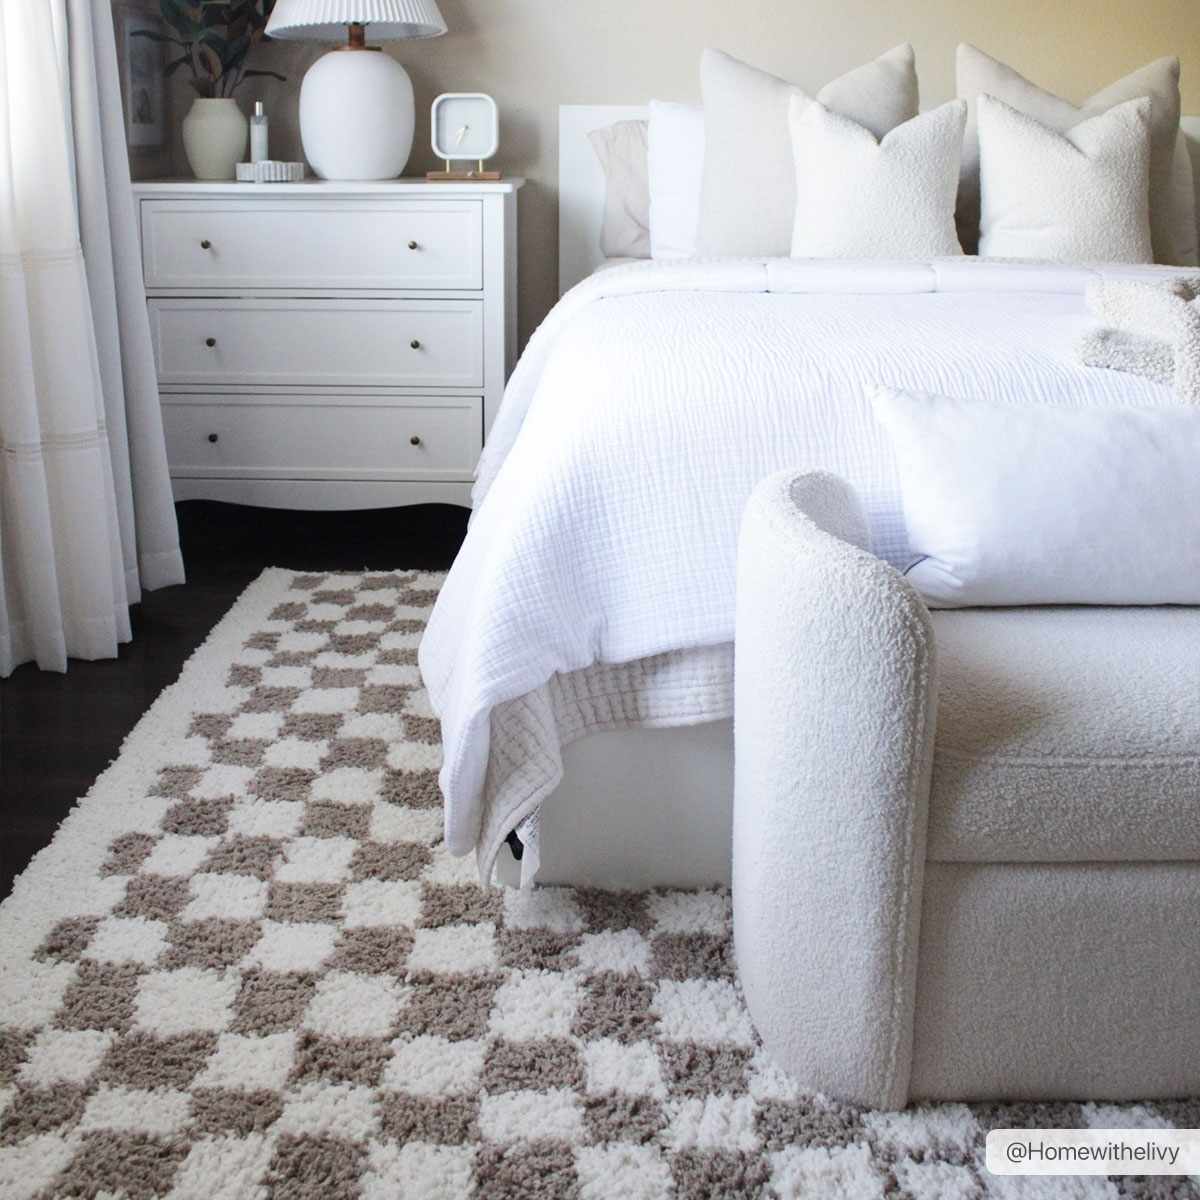 Boutique Rugs Rugs Kieu Light Gray & Taupe Checkered Area Rug